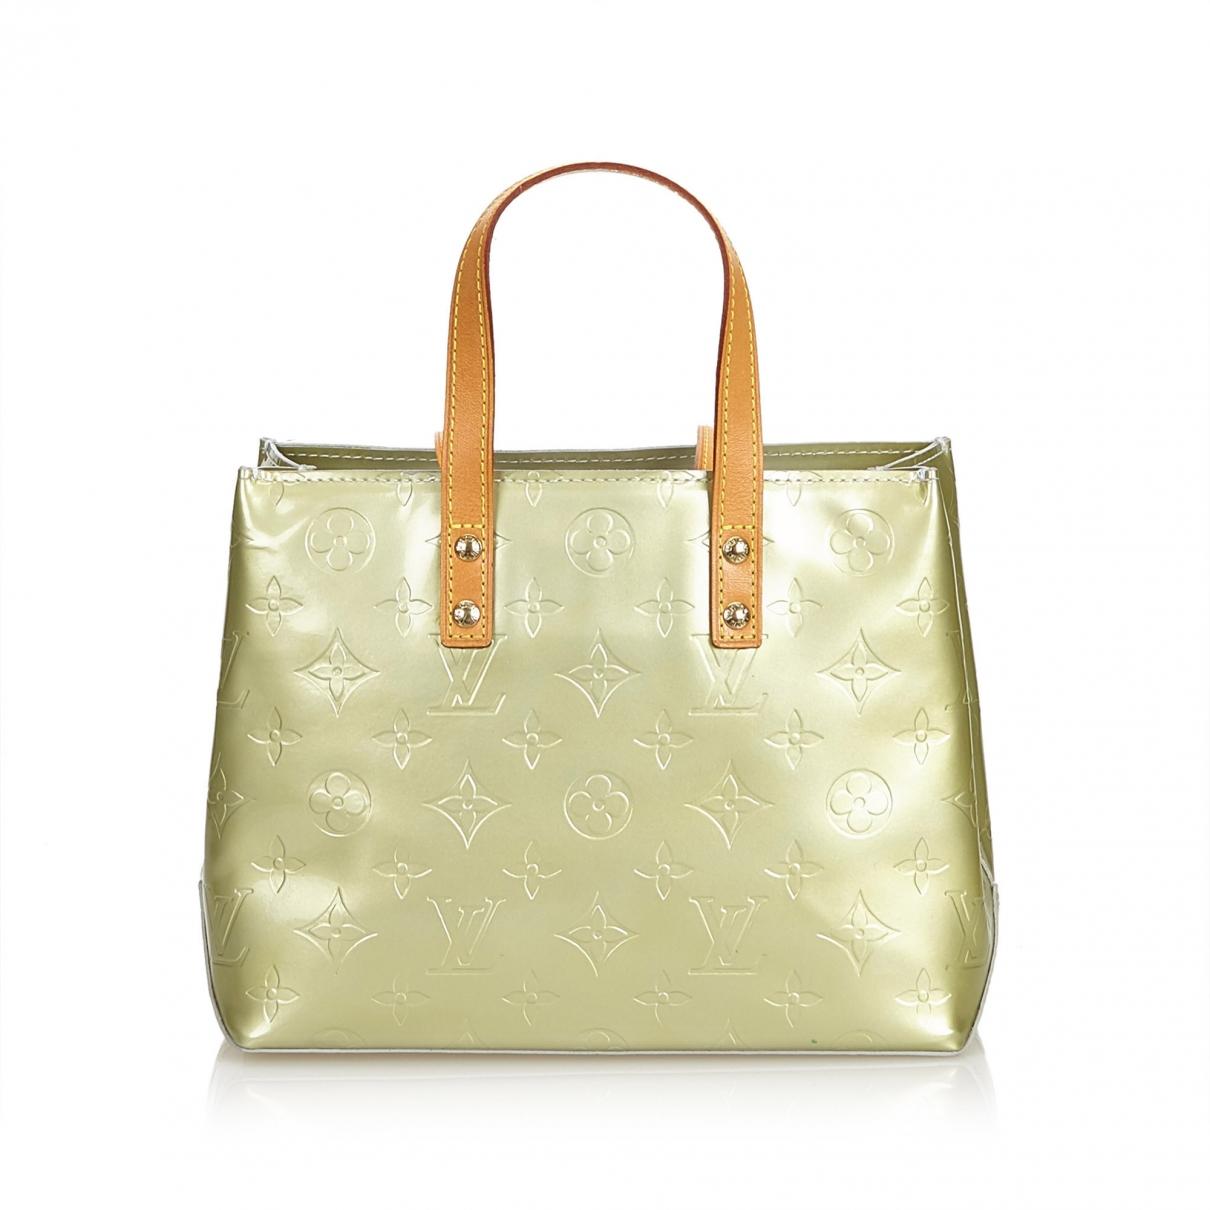 Lyst - Louis Vuitton Pre-owned Vintage Green Patent Leather Handbags in Green